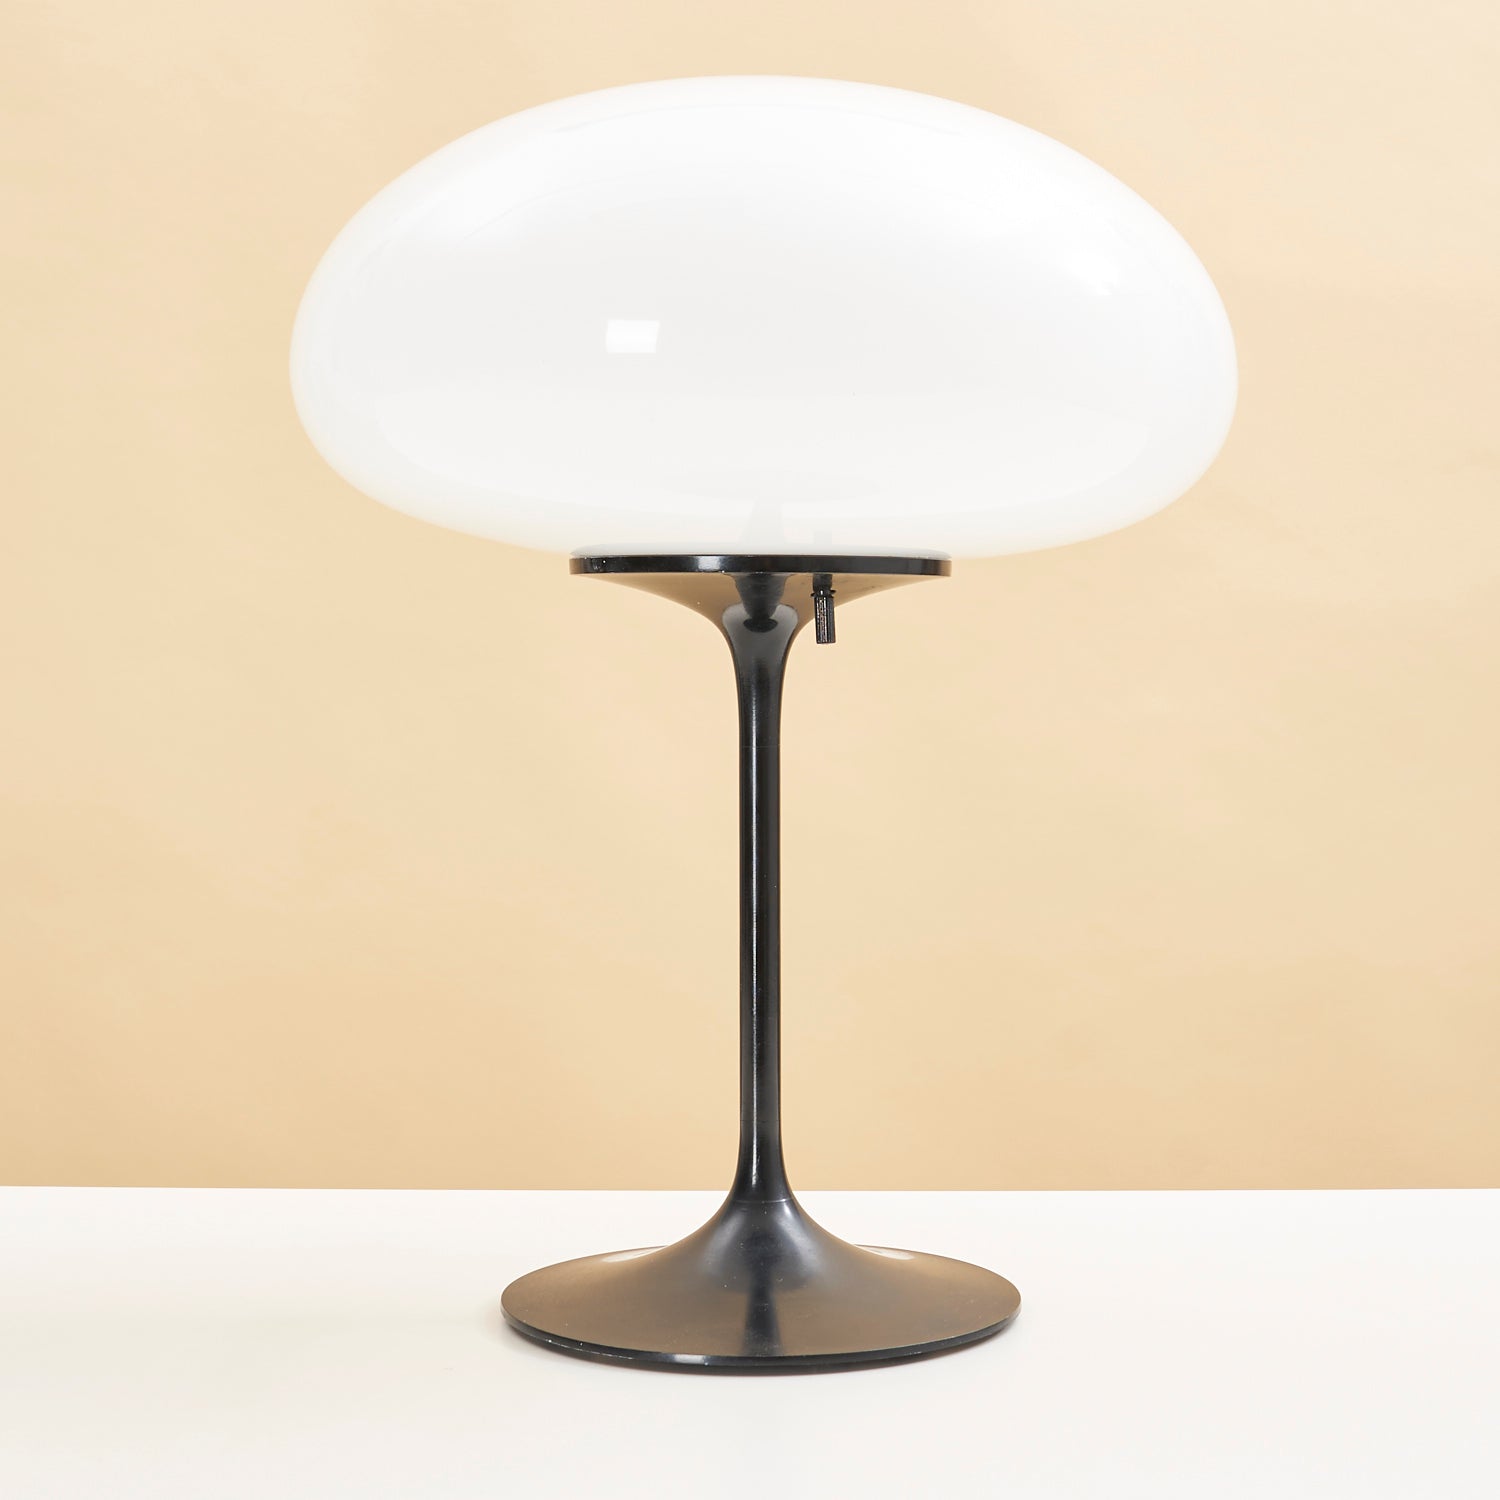 Vintage Bill Curry Stemlite Table Lamp by Design Line Inc.